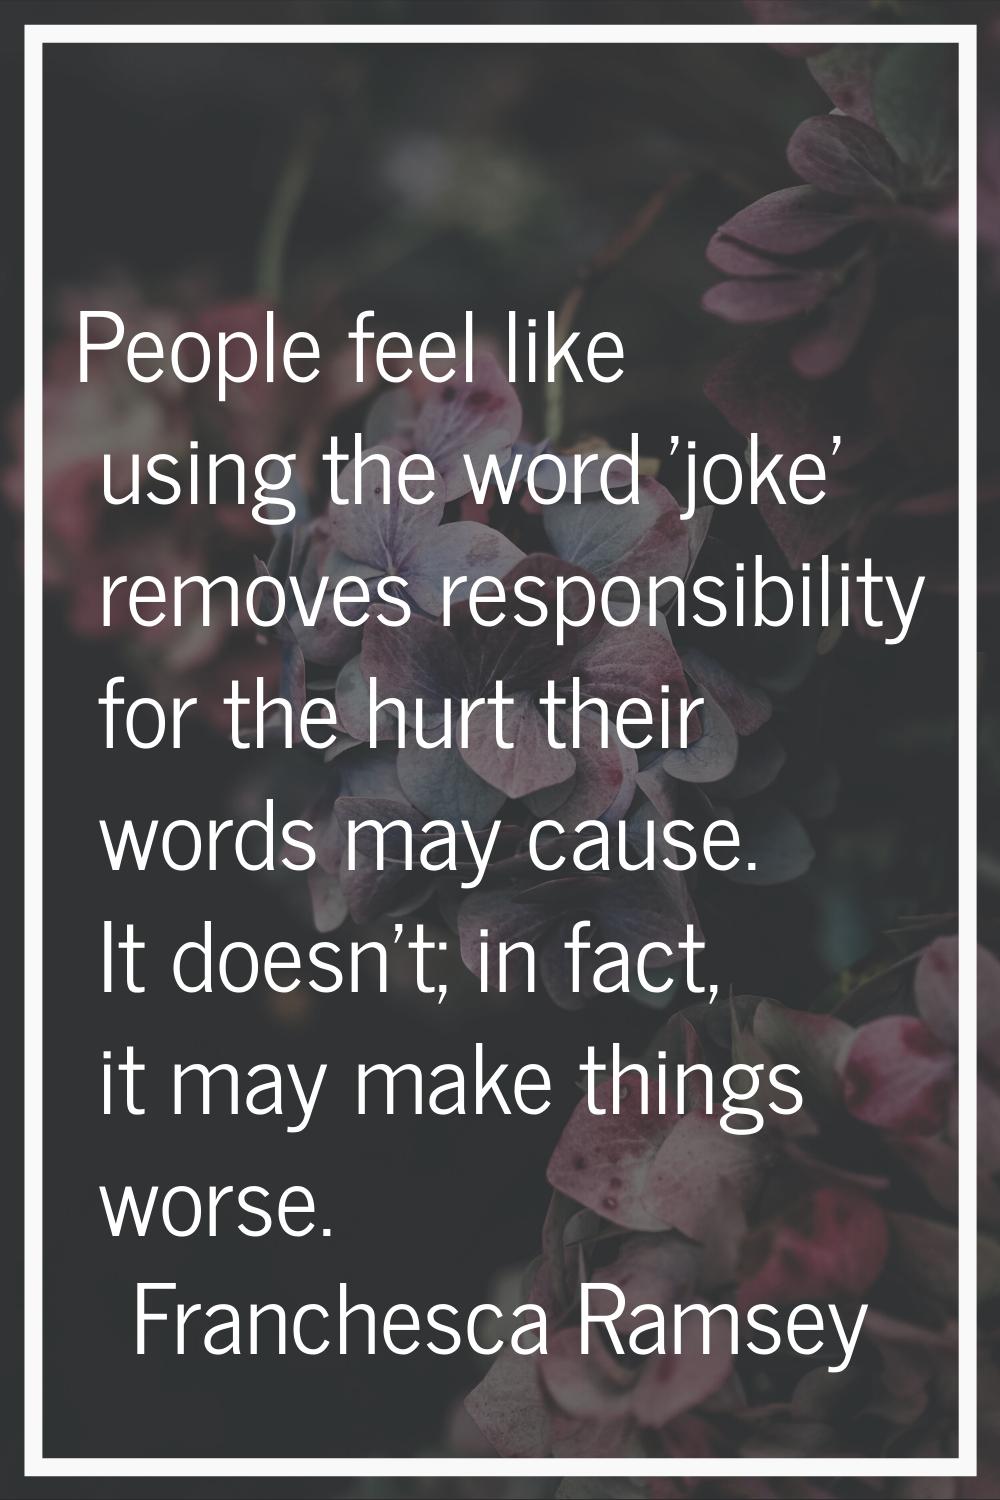 People feel like using the word 'joke' removes responsibility for the hurt their words may cause. I